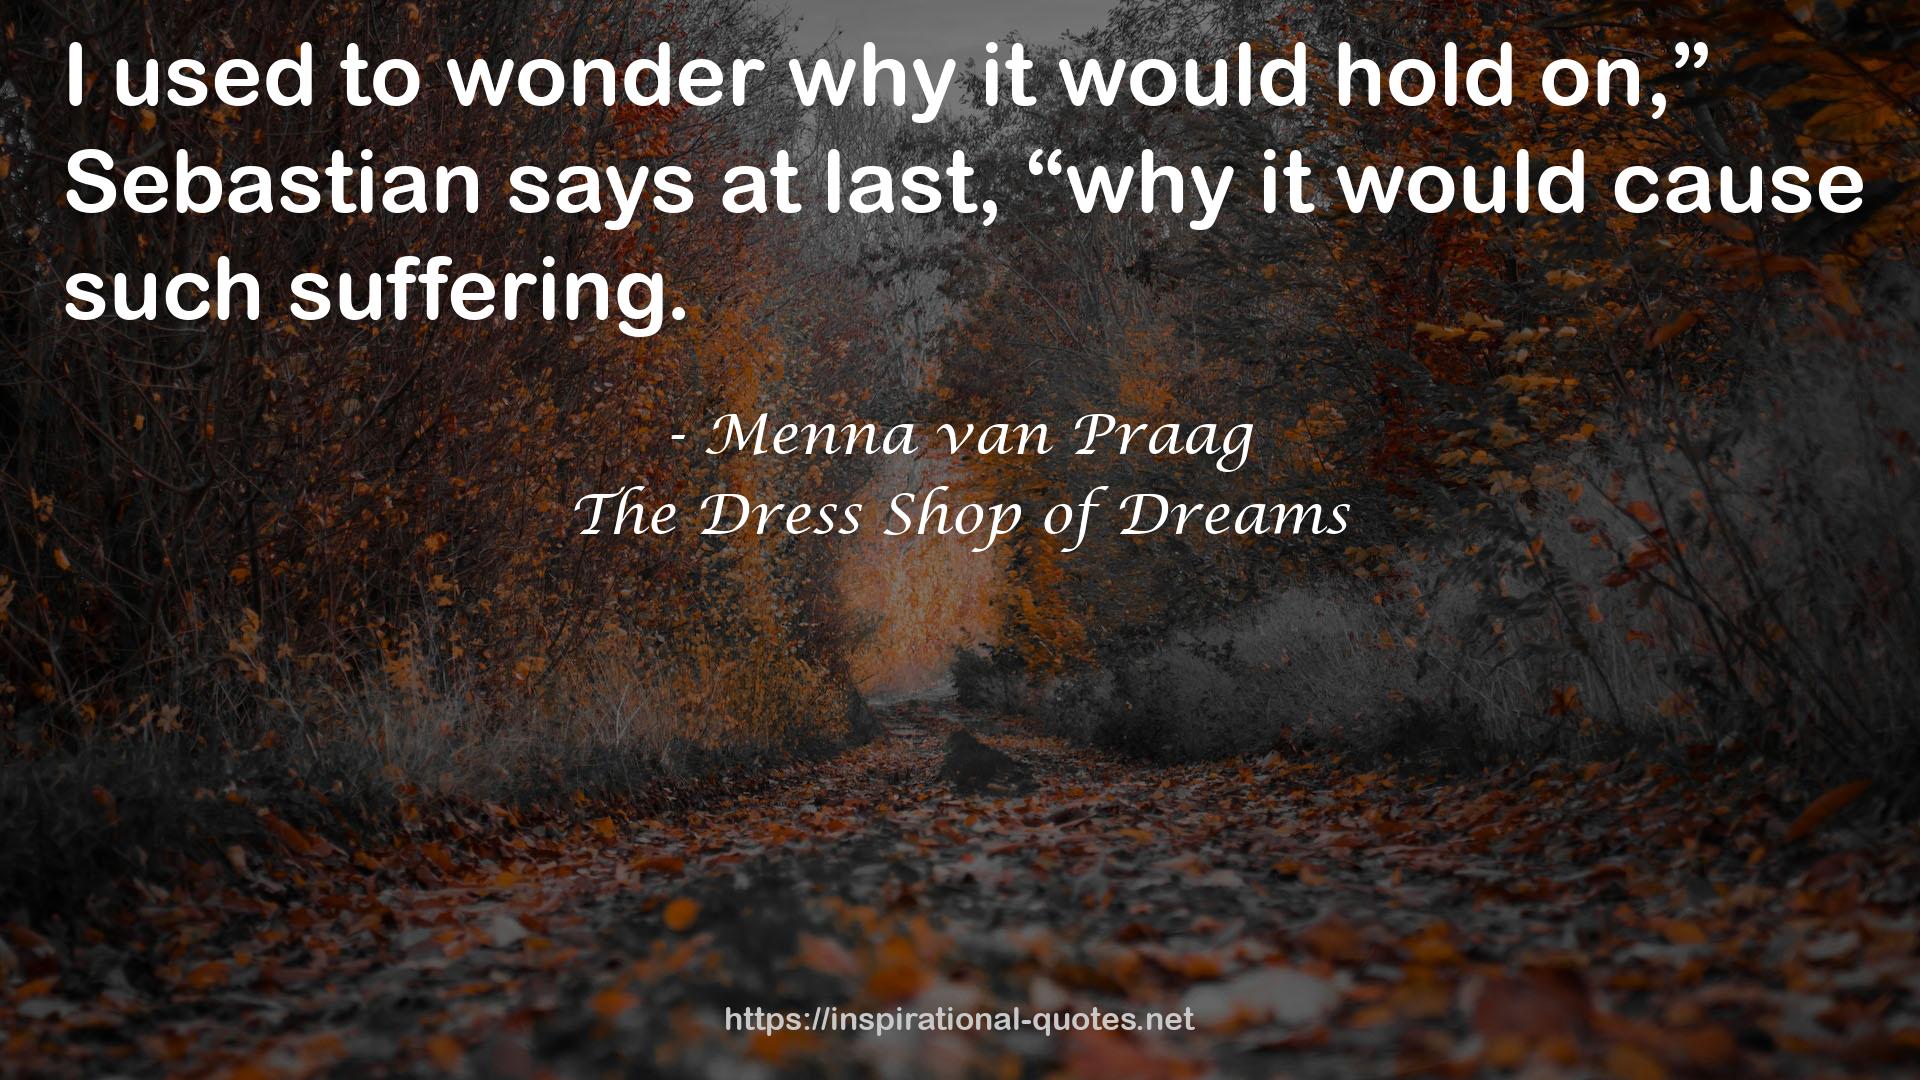 The Dress Shop of Dreams QUOTES